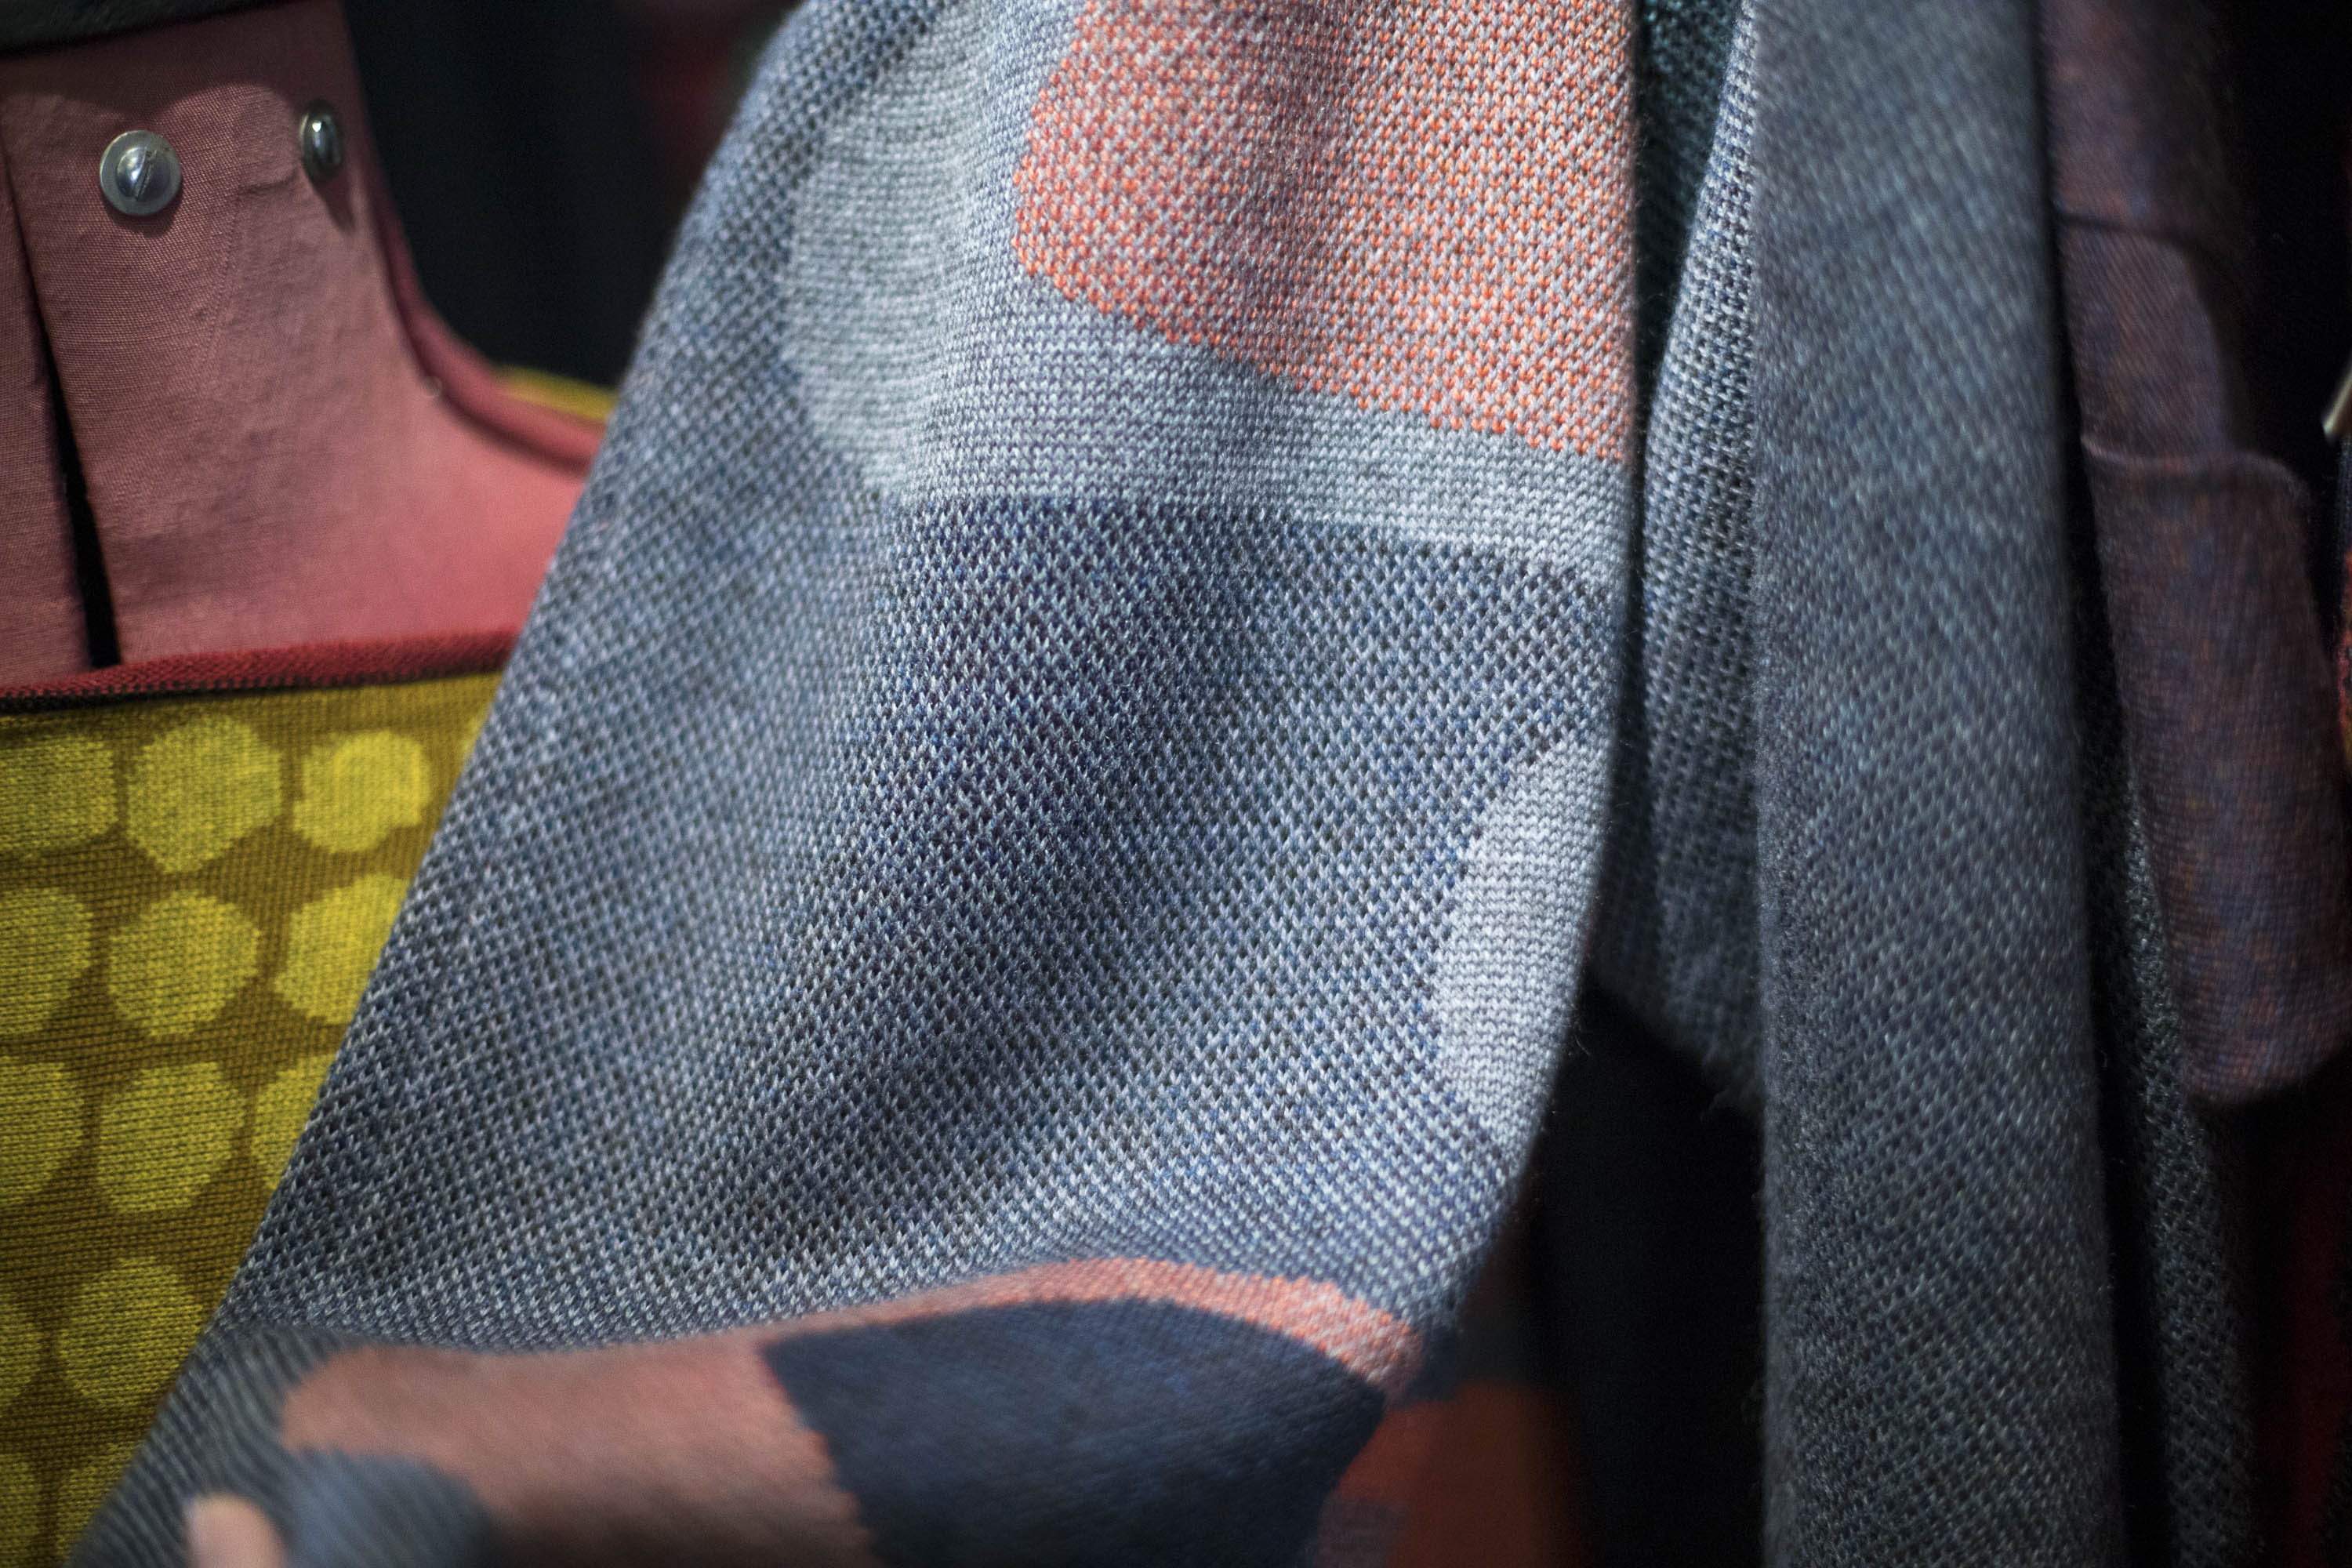 Close detail of knitted textile in three colours, which overlap to create abstract motifs and shape. Coral, grey and dark blue.